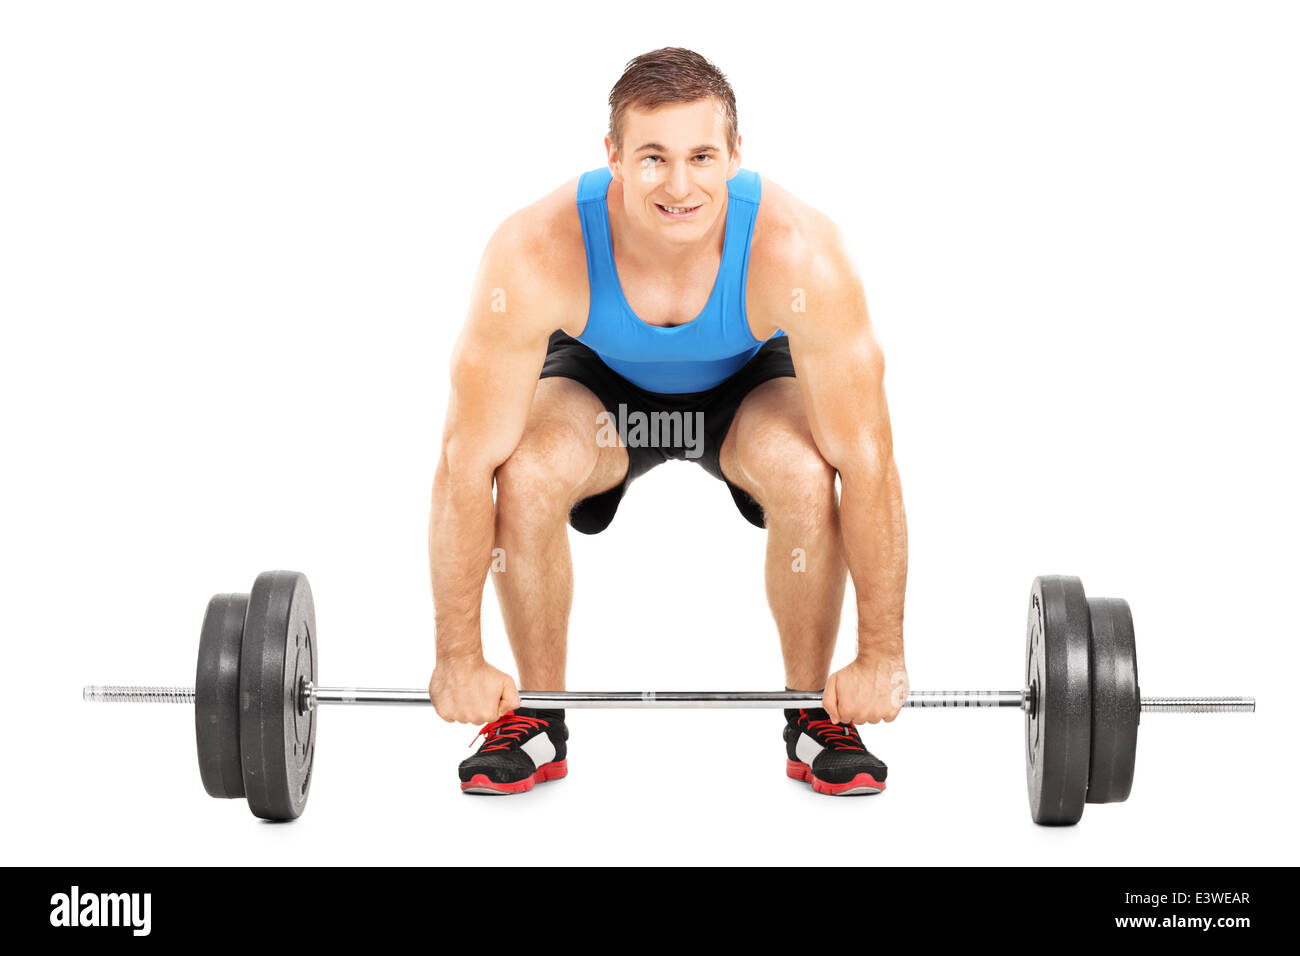 Weightlifting athlete lifting a barbell Stock Photo